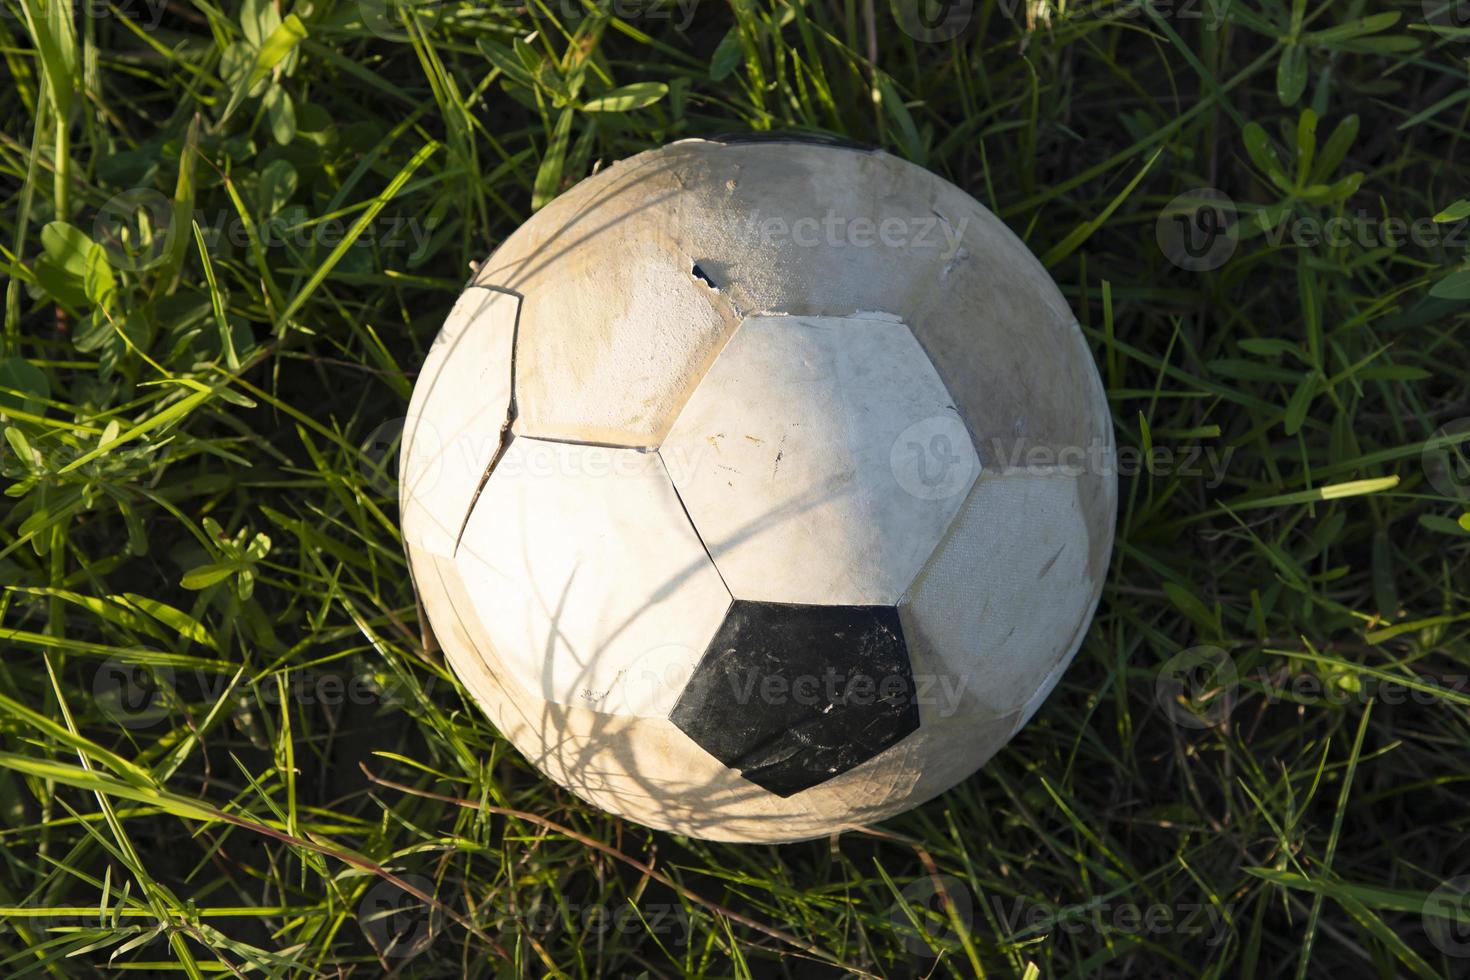 An old soccer ball lies in the grass, close-up photo